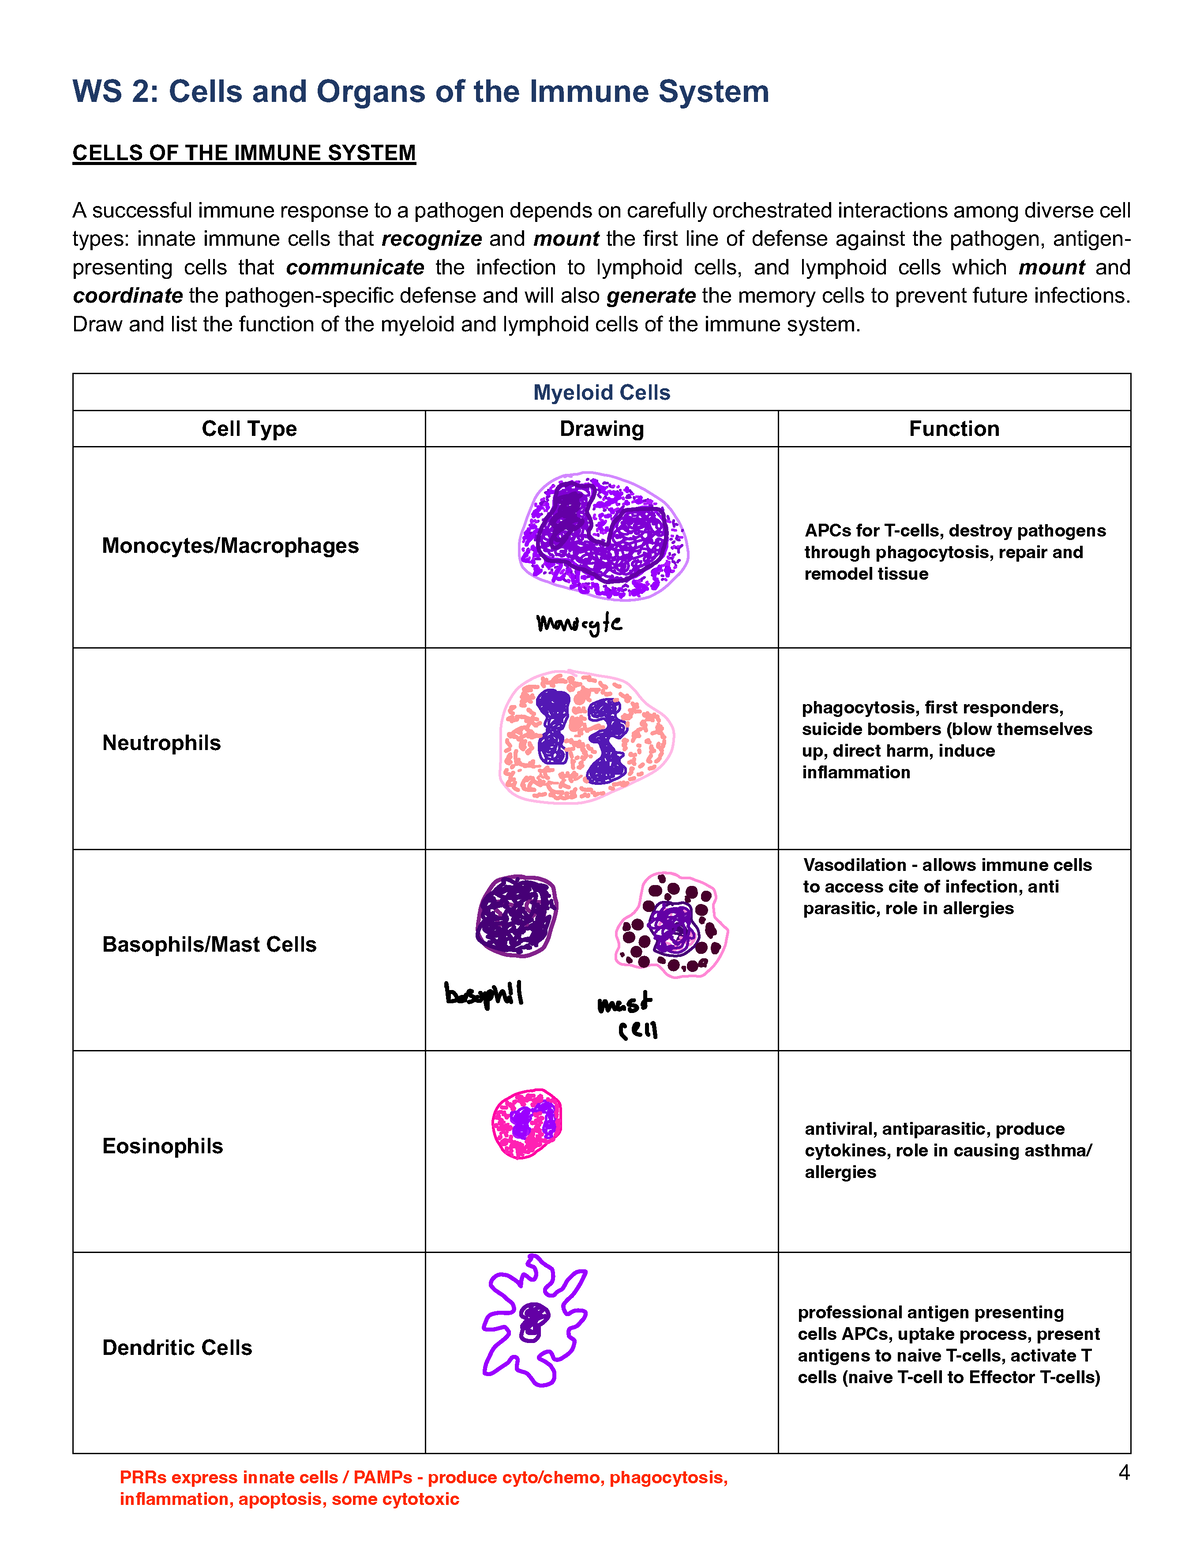 WS 2 - Worksheet 2 intro to Immuno. - 4 WS 2: Cells and Organs of the ...